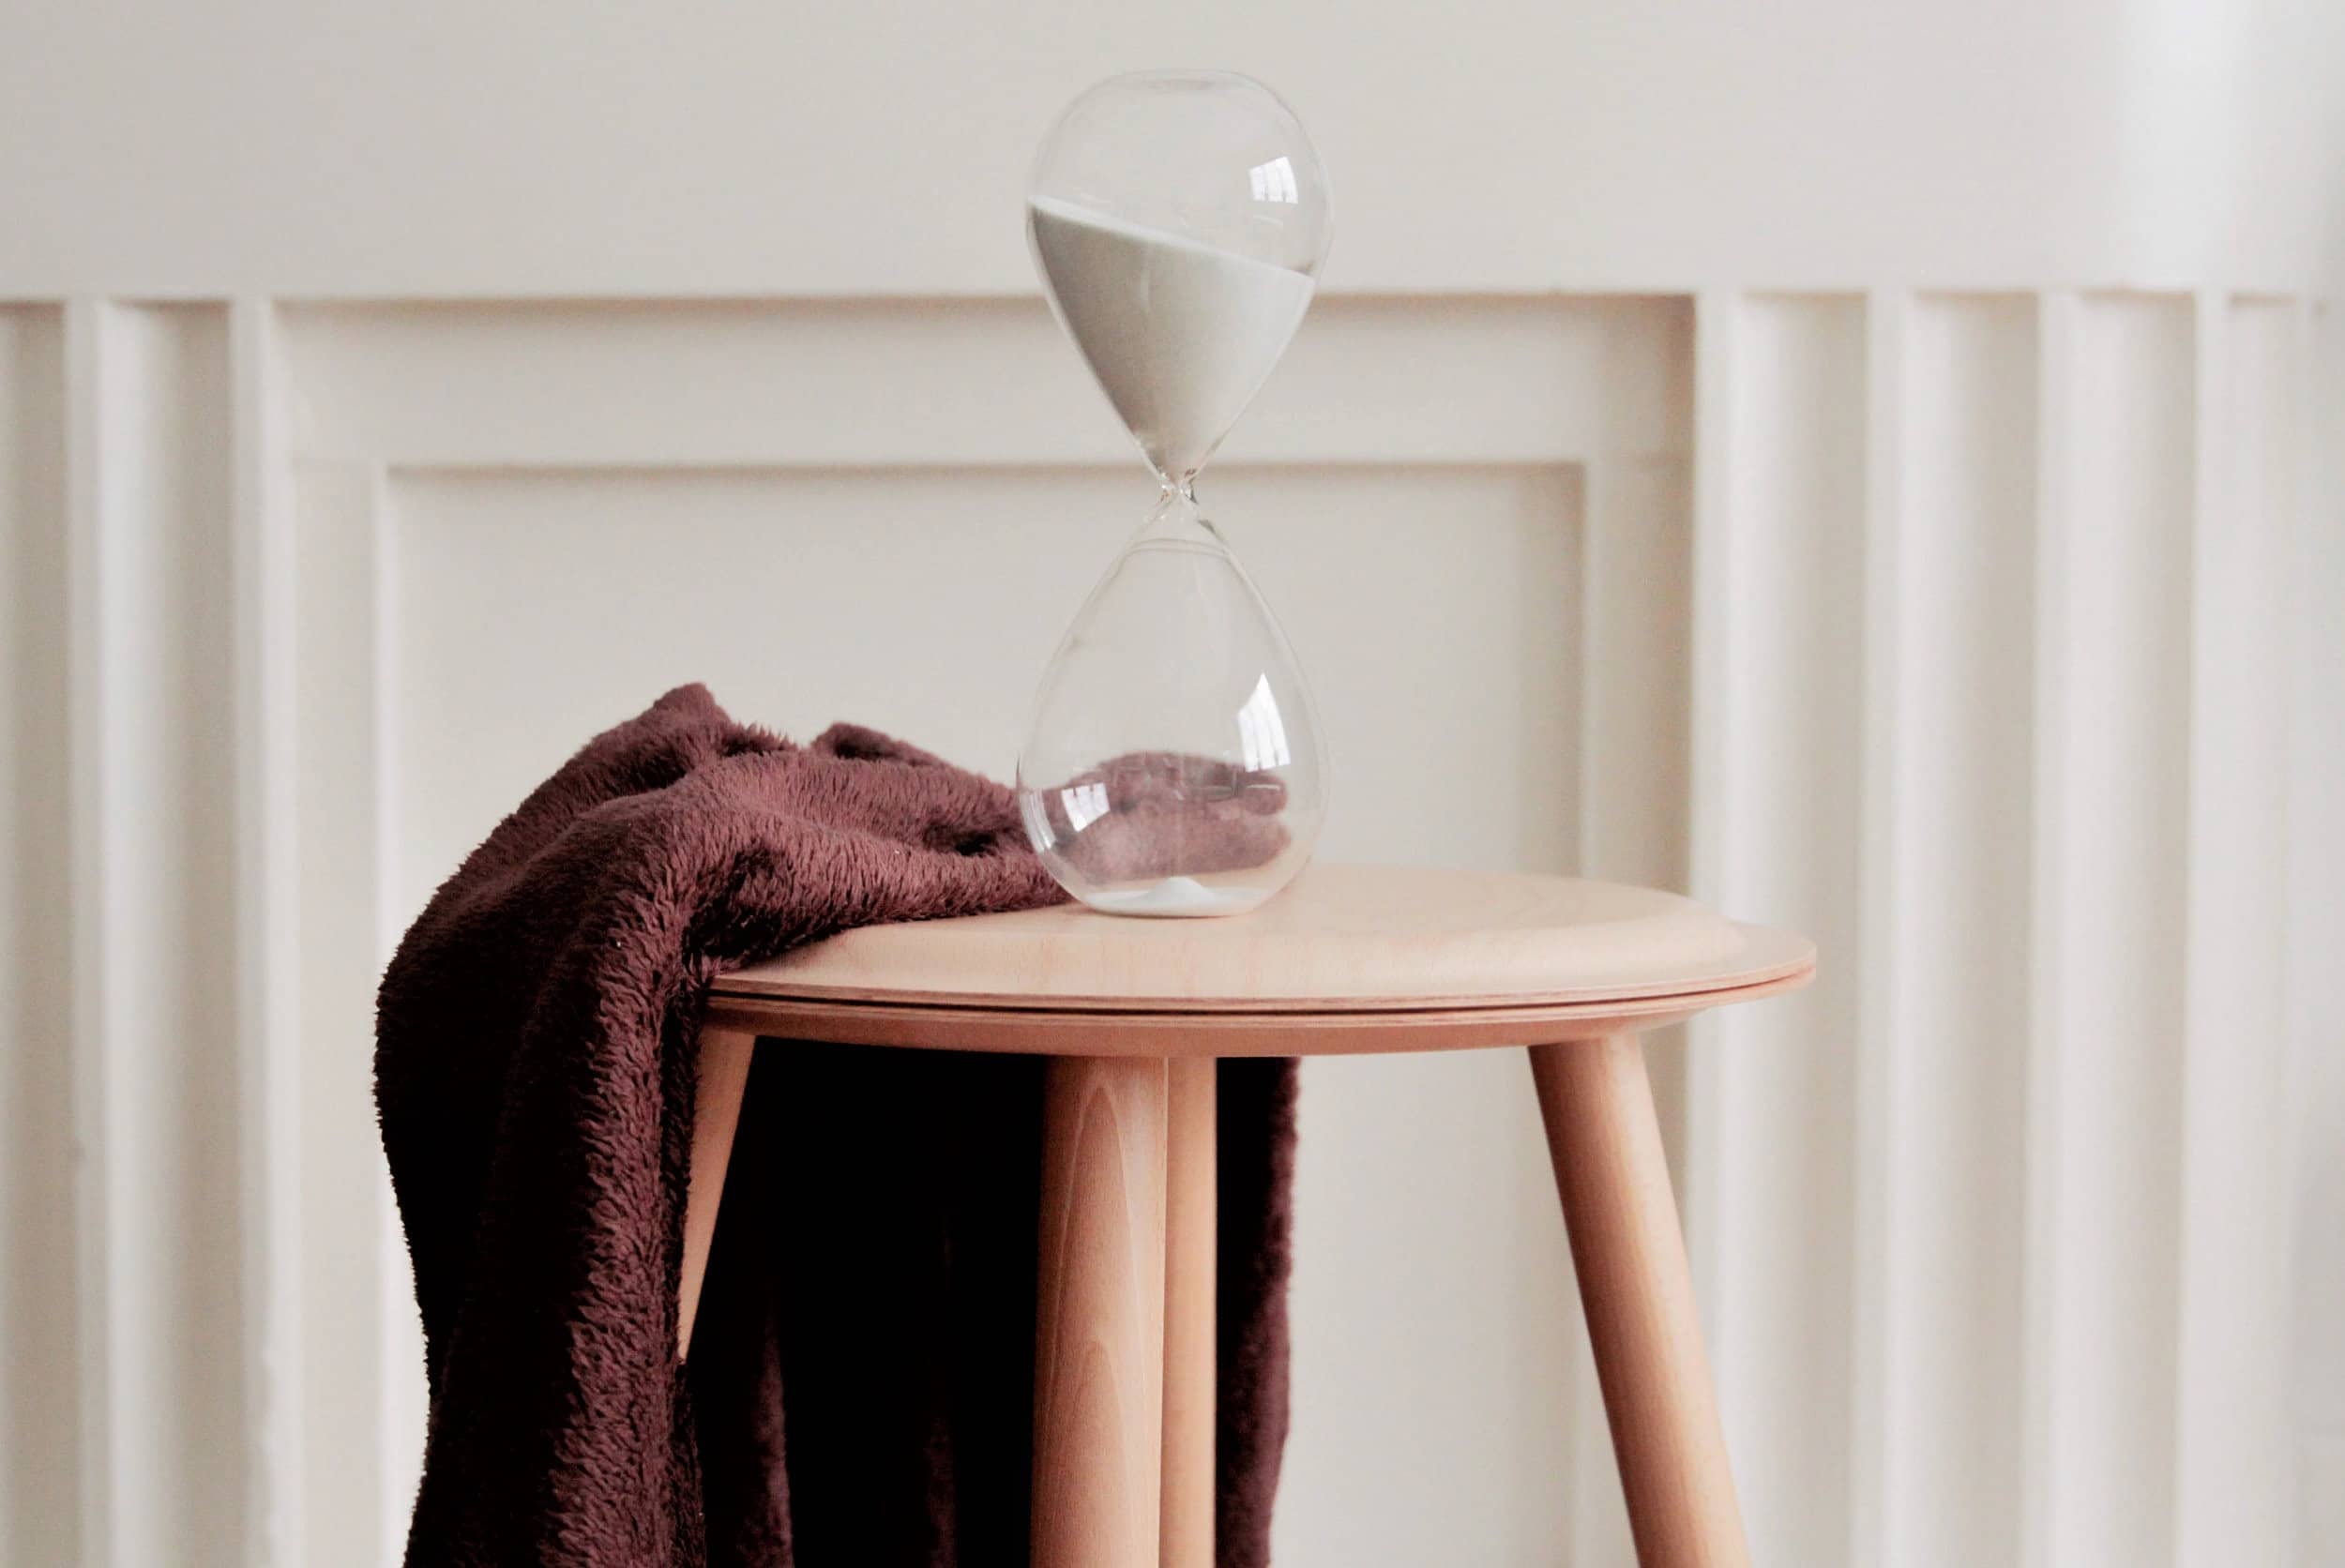 An hourglass with sand running out of the top section